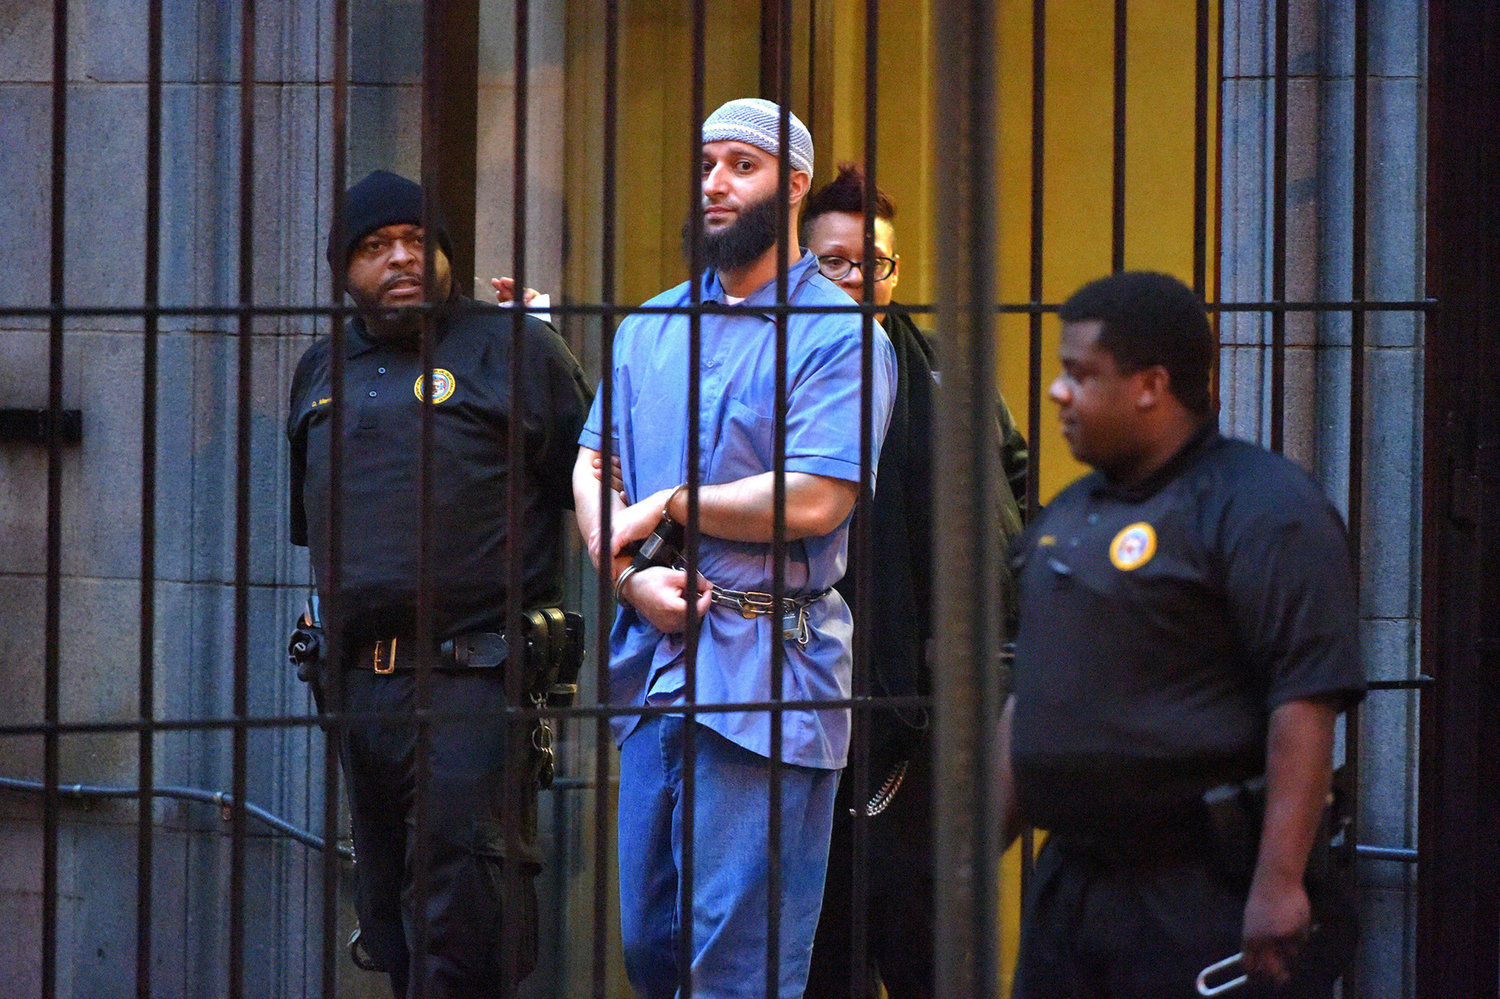 Officials escort "Serial" podcast subject Adnan Syed from the courthouse on Feb. 3, 2016, following the completion of the first day of hearings for a retrial in Baltimore. (Karl Merton Ferron/Baltimore Sun/TNS)